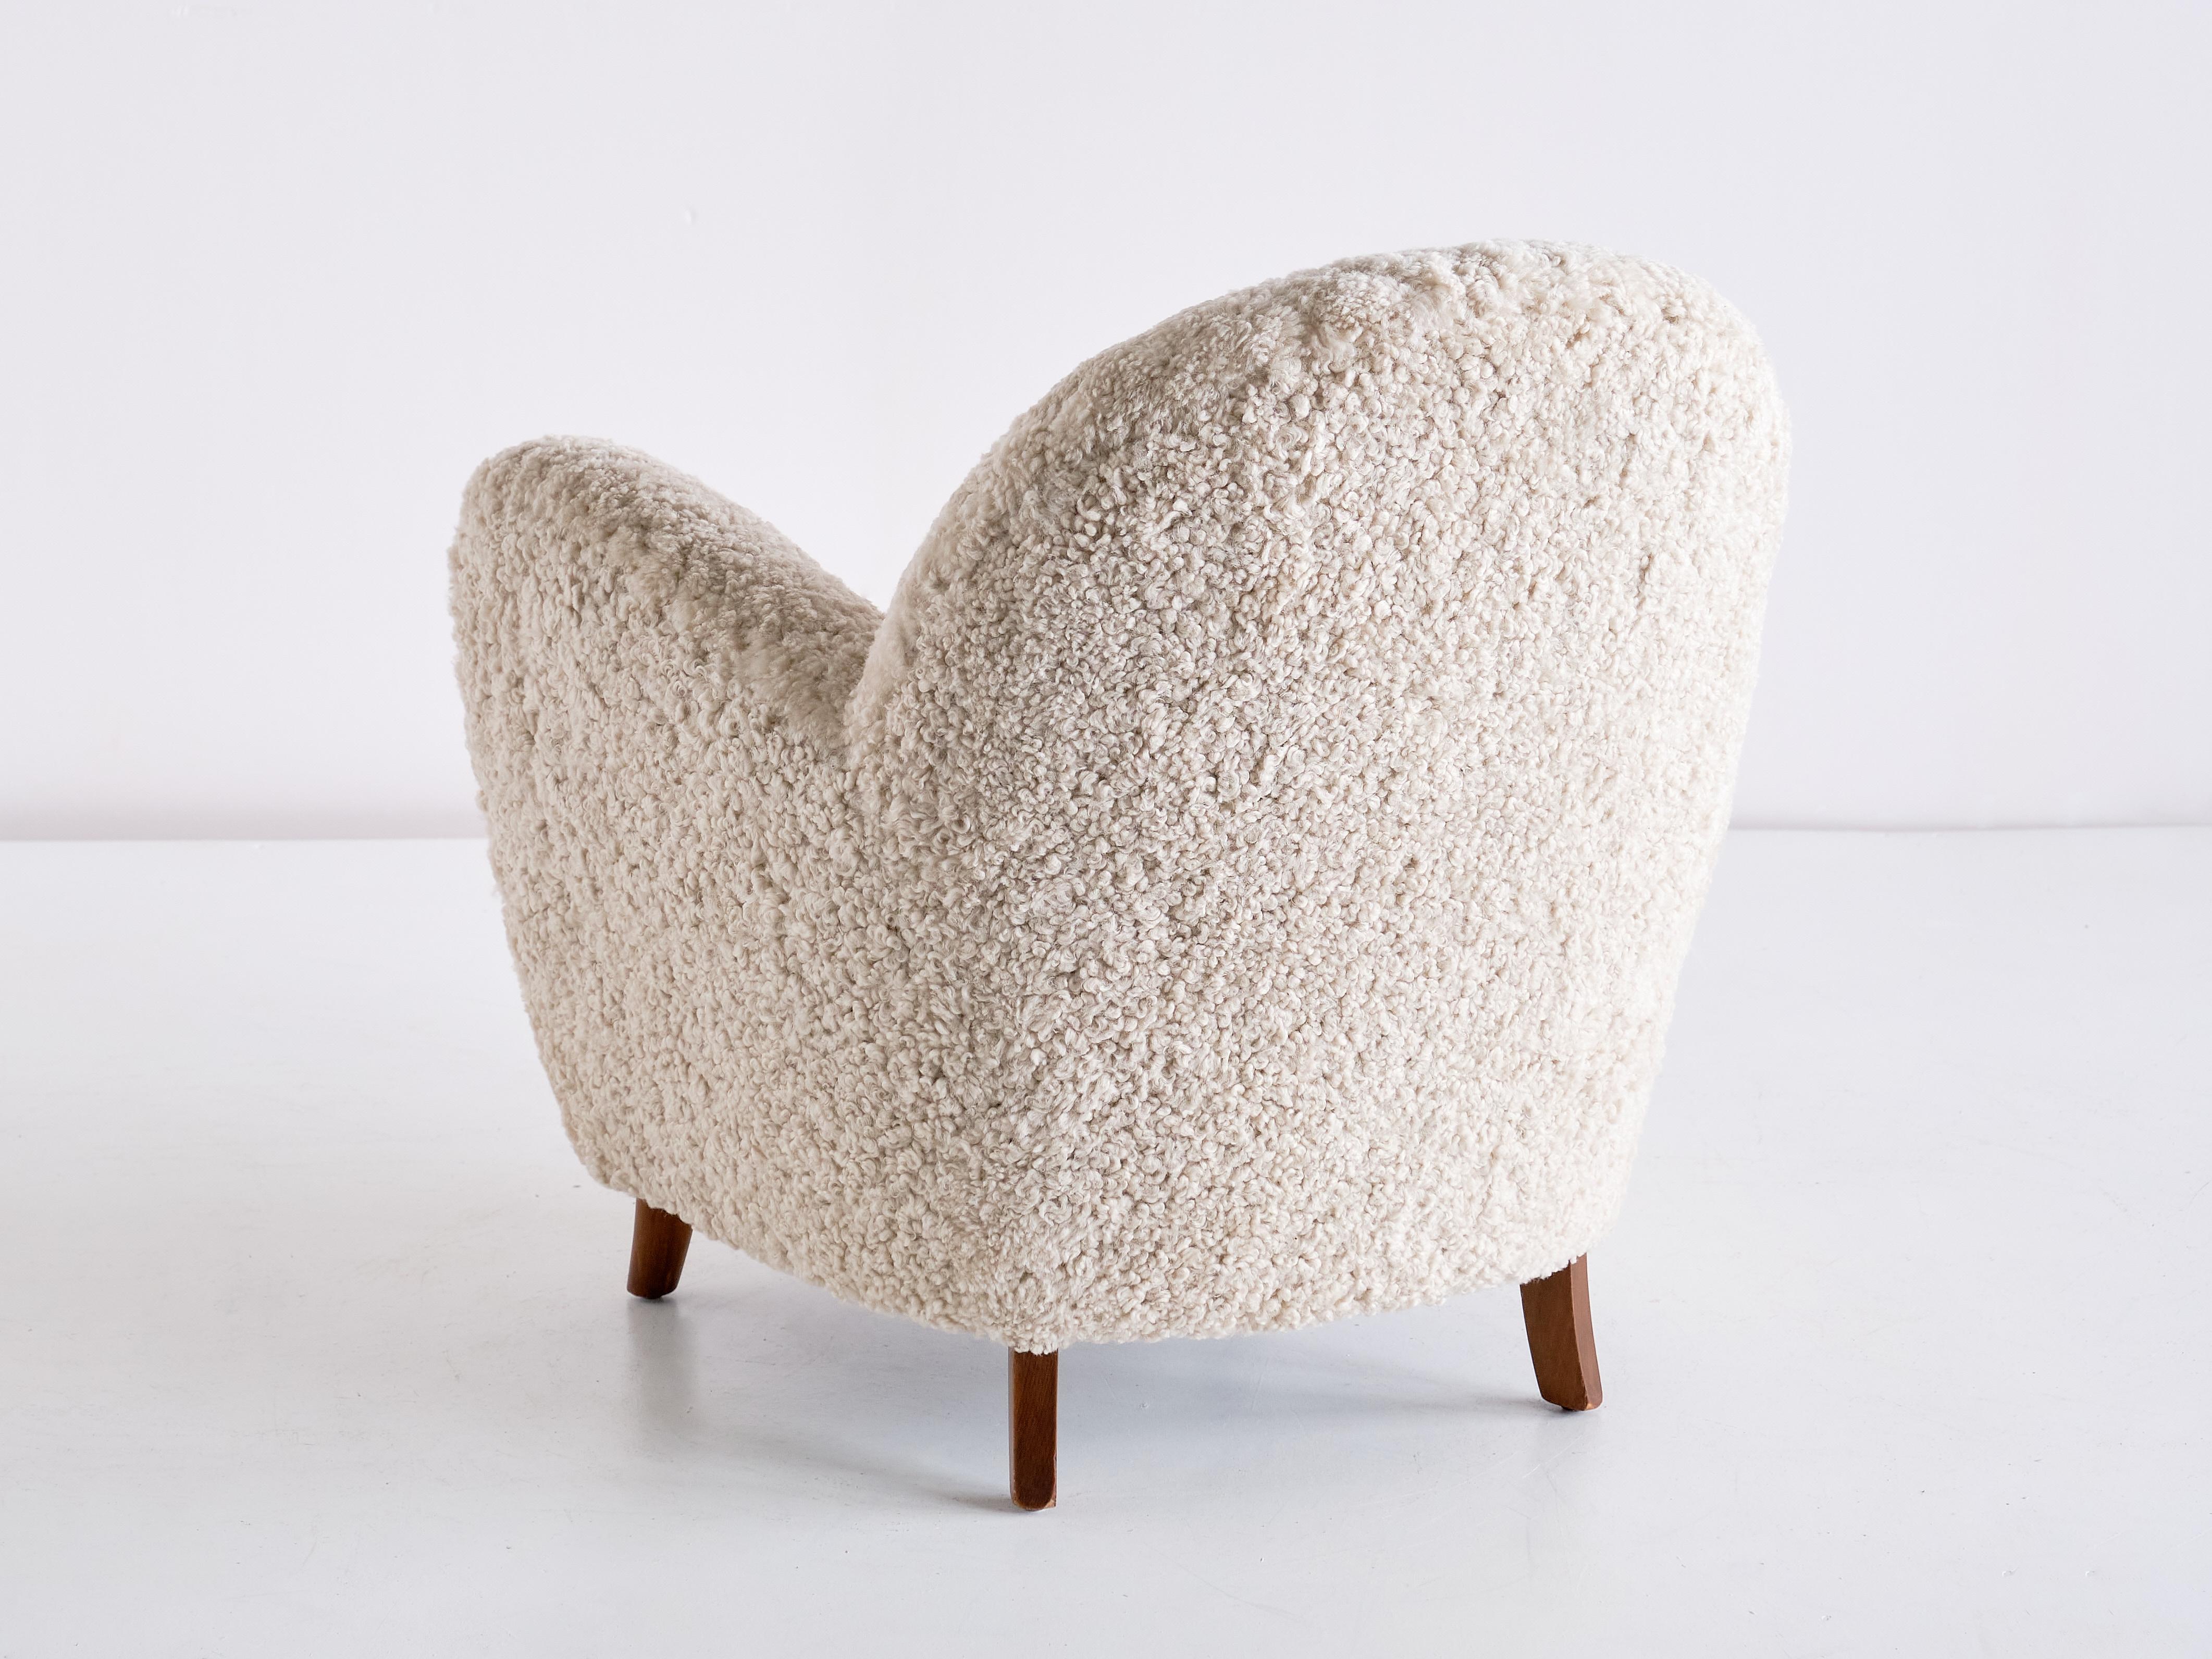 Pair of Thorald Madsen Armchairs in Sheepskin and Beech, Denmark, Mid 1930s For Sale 5